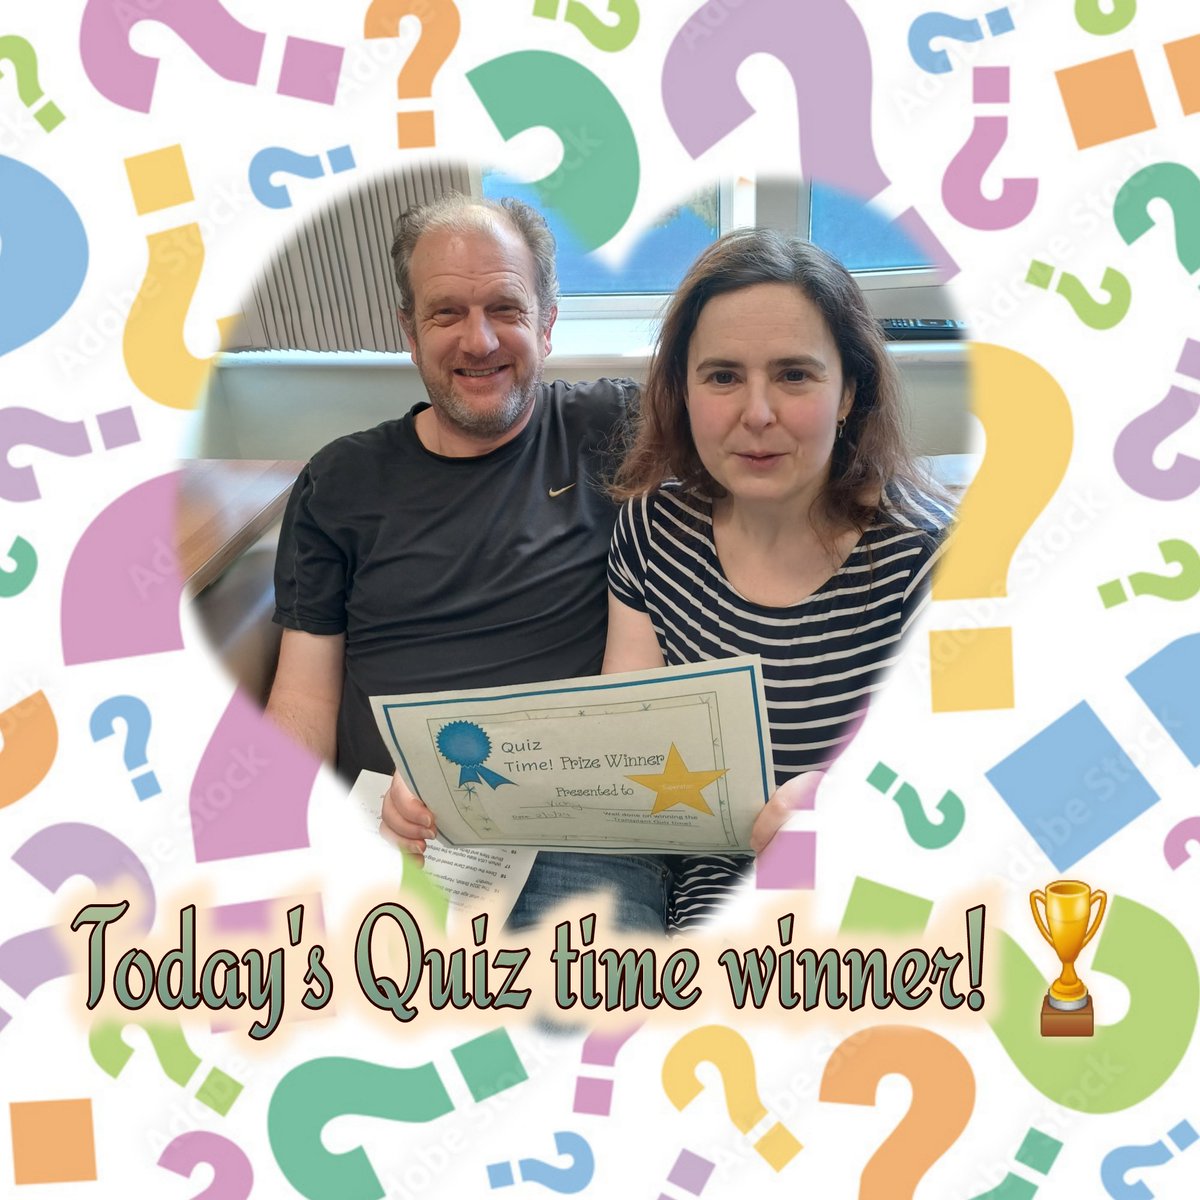 Today's Quiz time winner on JQ! Well done Vicky and Steve! Amazing score 👏 and such a lot of competition today for the quiz winners crown! 🏆 #brainhealth #quizzing @Michaela0895 @vikki_warman @TntTracy73 @MFT_PatientExp @parkerkarenj #distraction #winner